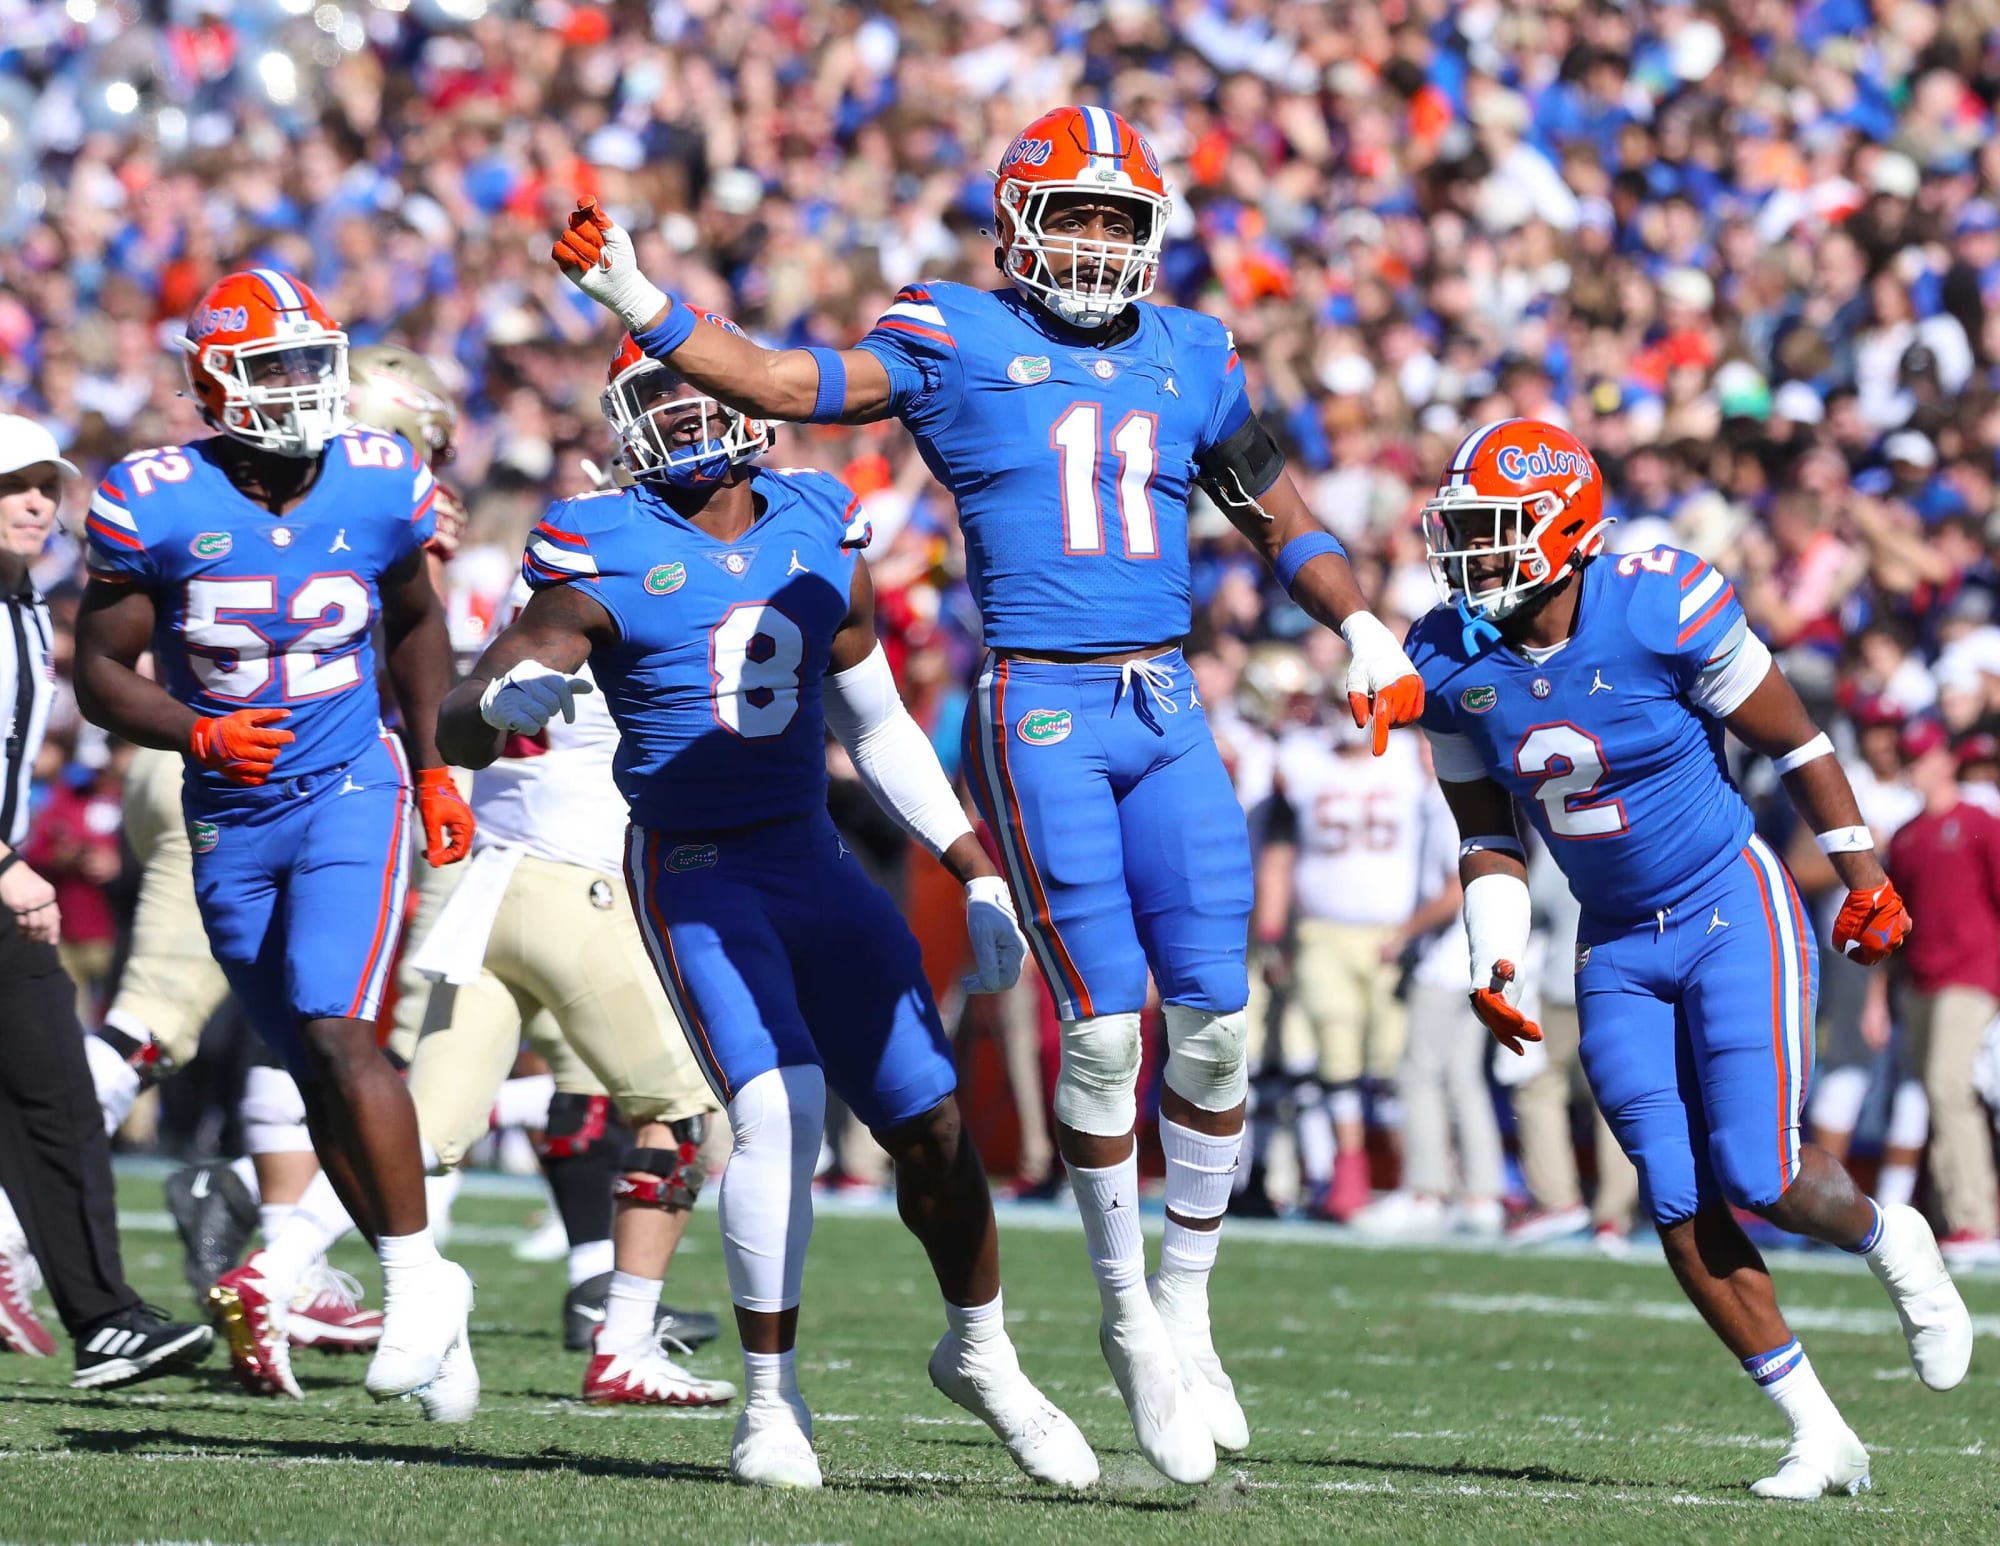 Bowl projections 2021 What bowl game will Florida play in?